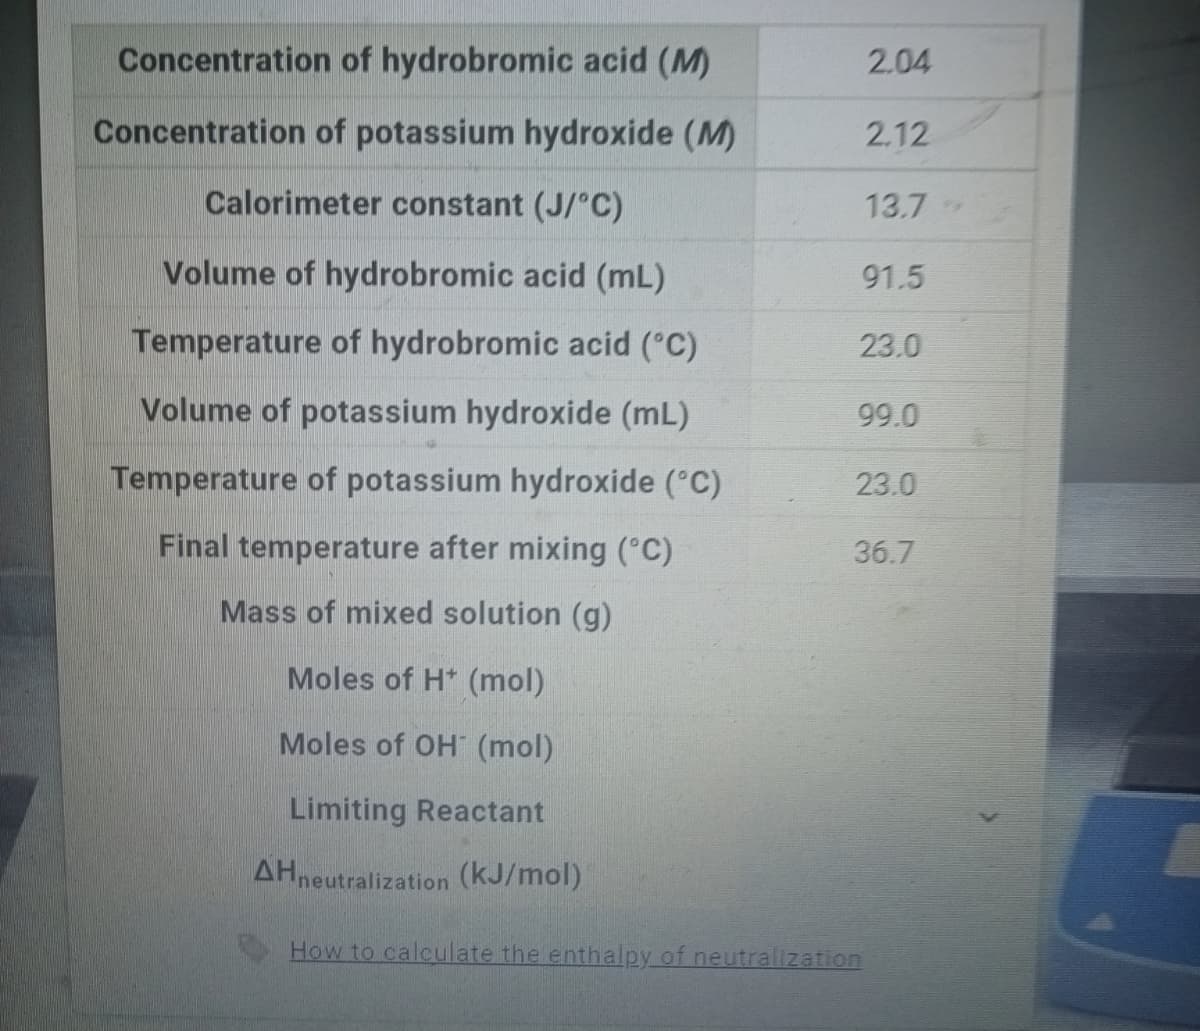 Concentration of hydrobromic acid (M)
2.04
Concentration of potassium hydroxide (M)
2.12
Calorimeter constant (J/°C)
13.7
Volume of hydrobromic acid (mL)
91.5
Temperature of hydrobromic acid ("C)
23.0
Volume of potassium hydroxide (mL)
99.0
Temperature of potassium hydroxide (°C)
23.0
Final temperature after mixing (°C)
36.7
Mass of mixed solution (g)
Moles of H* (mol)
Moles of OH (mol)
Limiting Reactant
AHneutralization (kJ/mol)
How to calculate the enthalpy of neutralization
